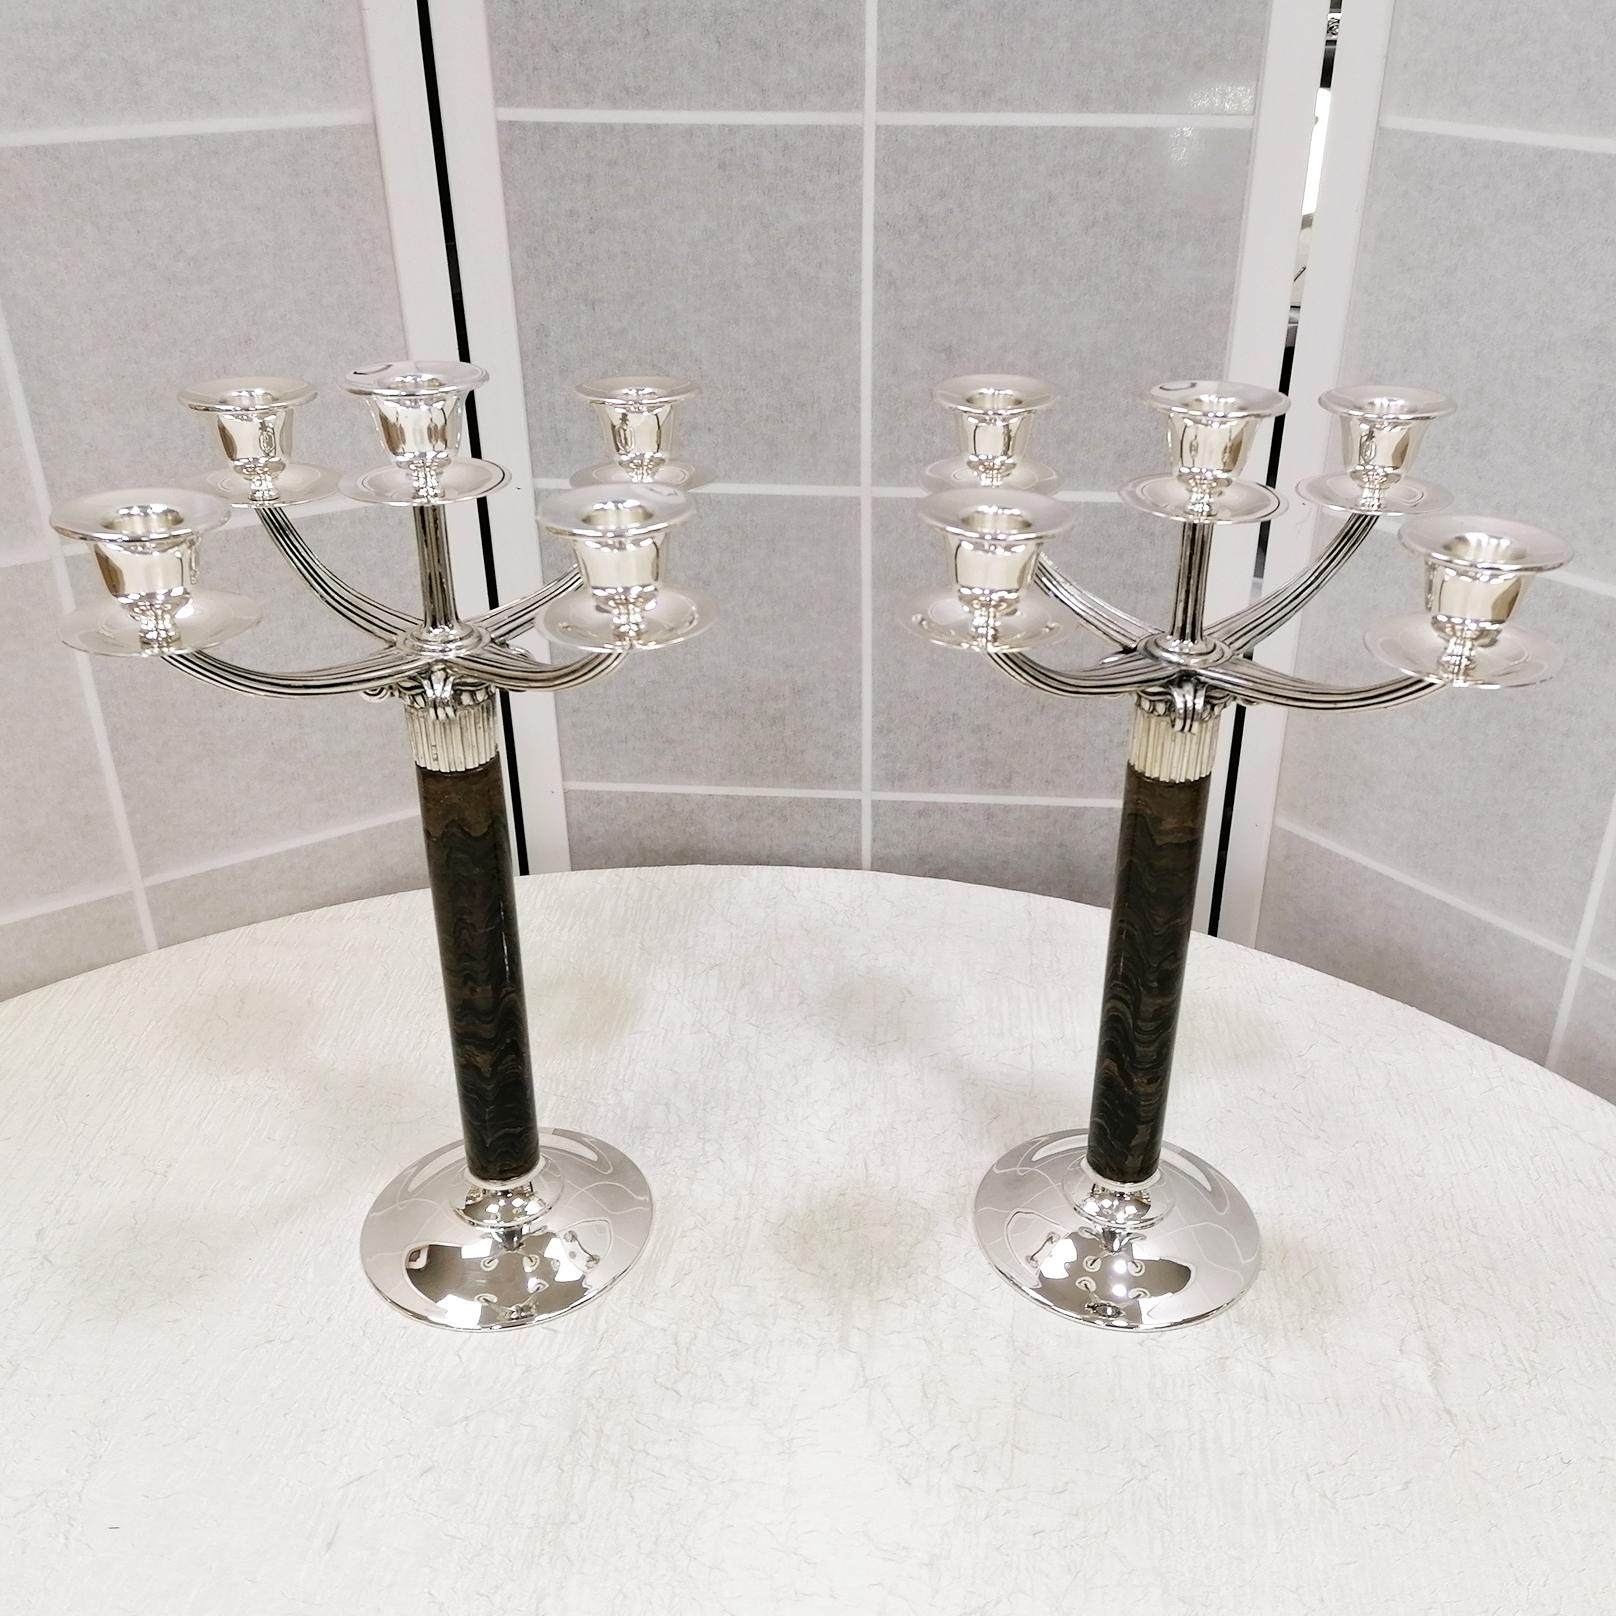 Pair of 5-light candelabra in 925 sterling silver in neoclassical style.
Candelabra formed by an iron eye stem and a Hellenic part in Ionic style in 925 silver.
The iron eye is a stone that brings mental and physical benefits. 
Its union with silver